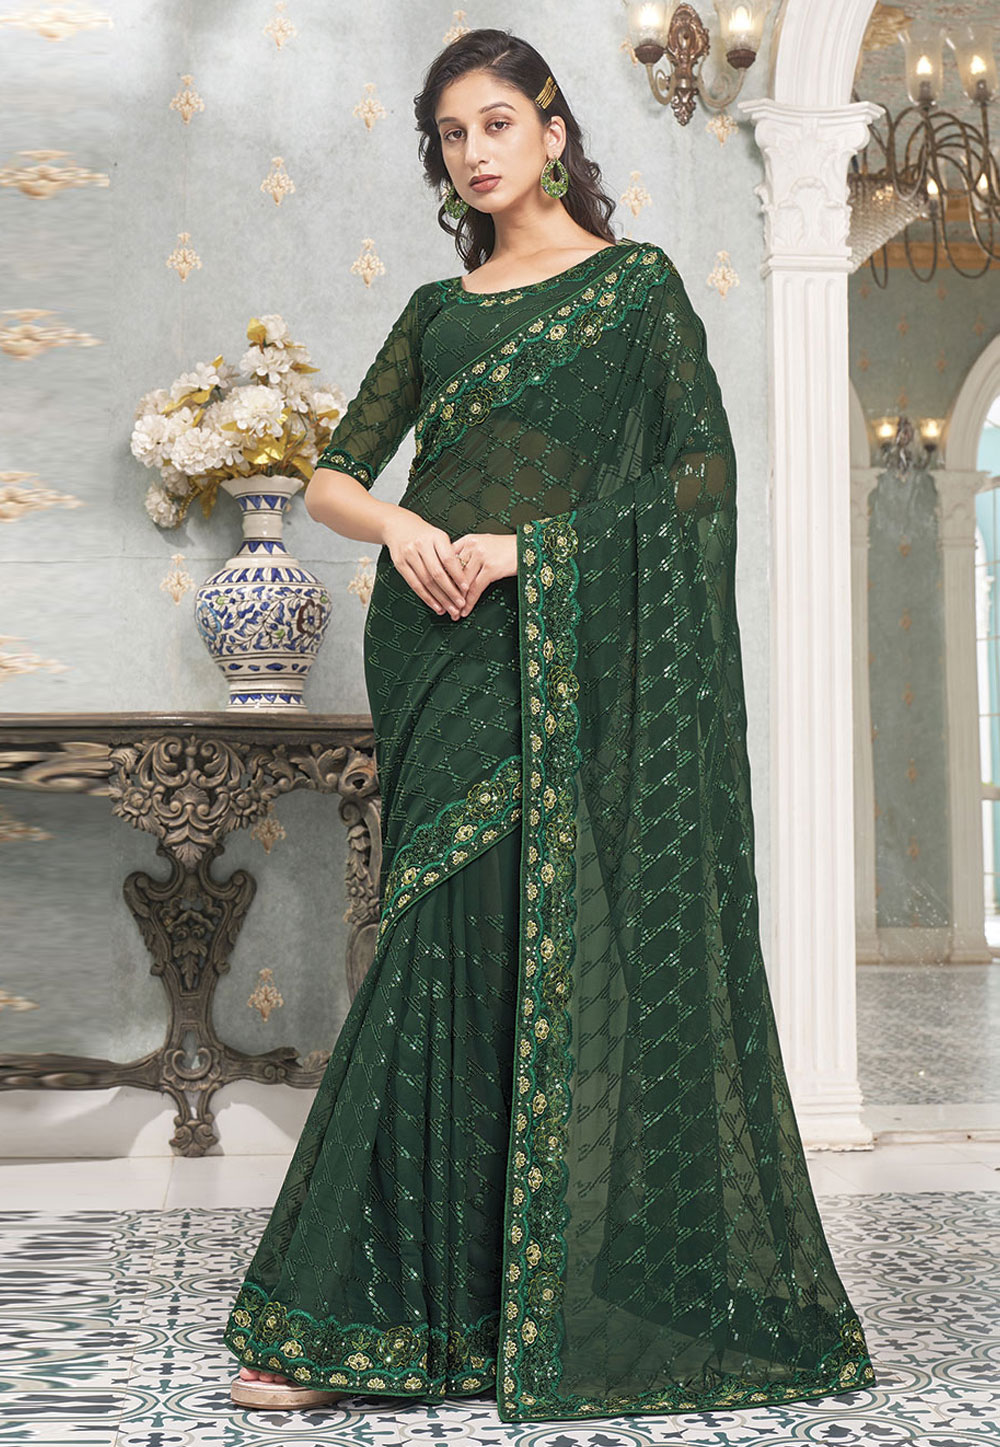 Green Faux Georgette Saree With Blouse 279845